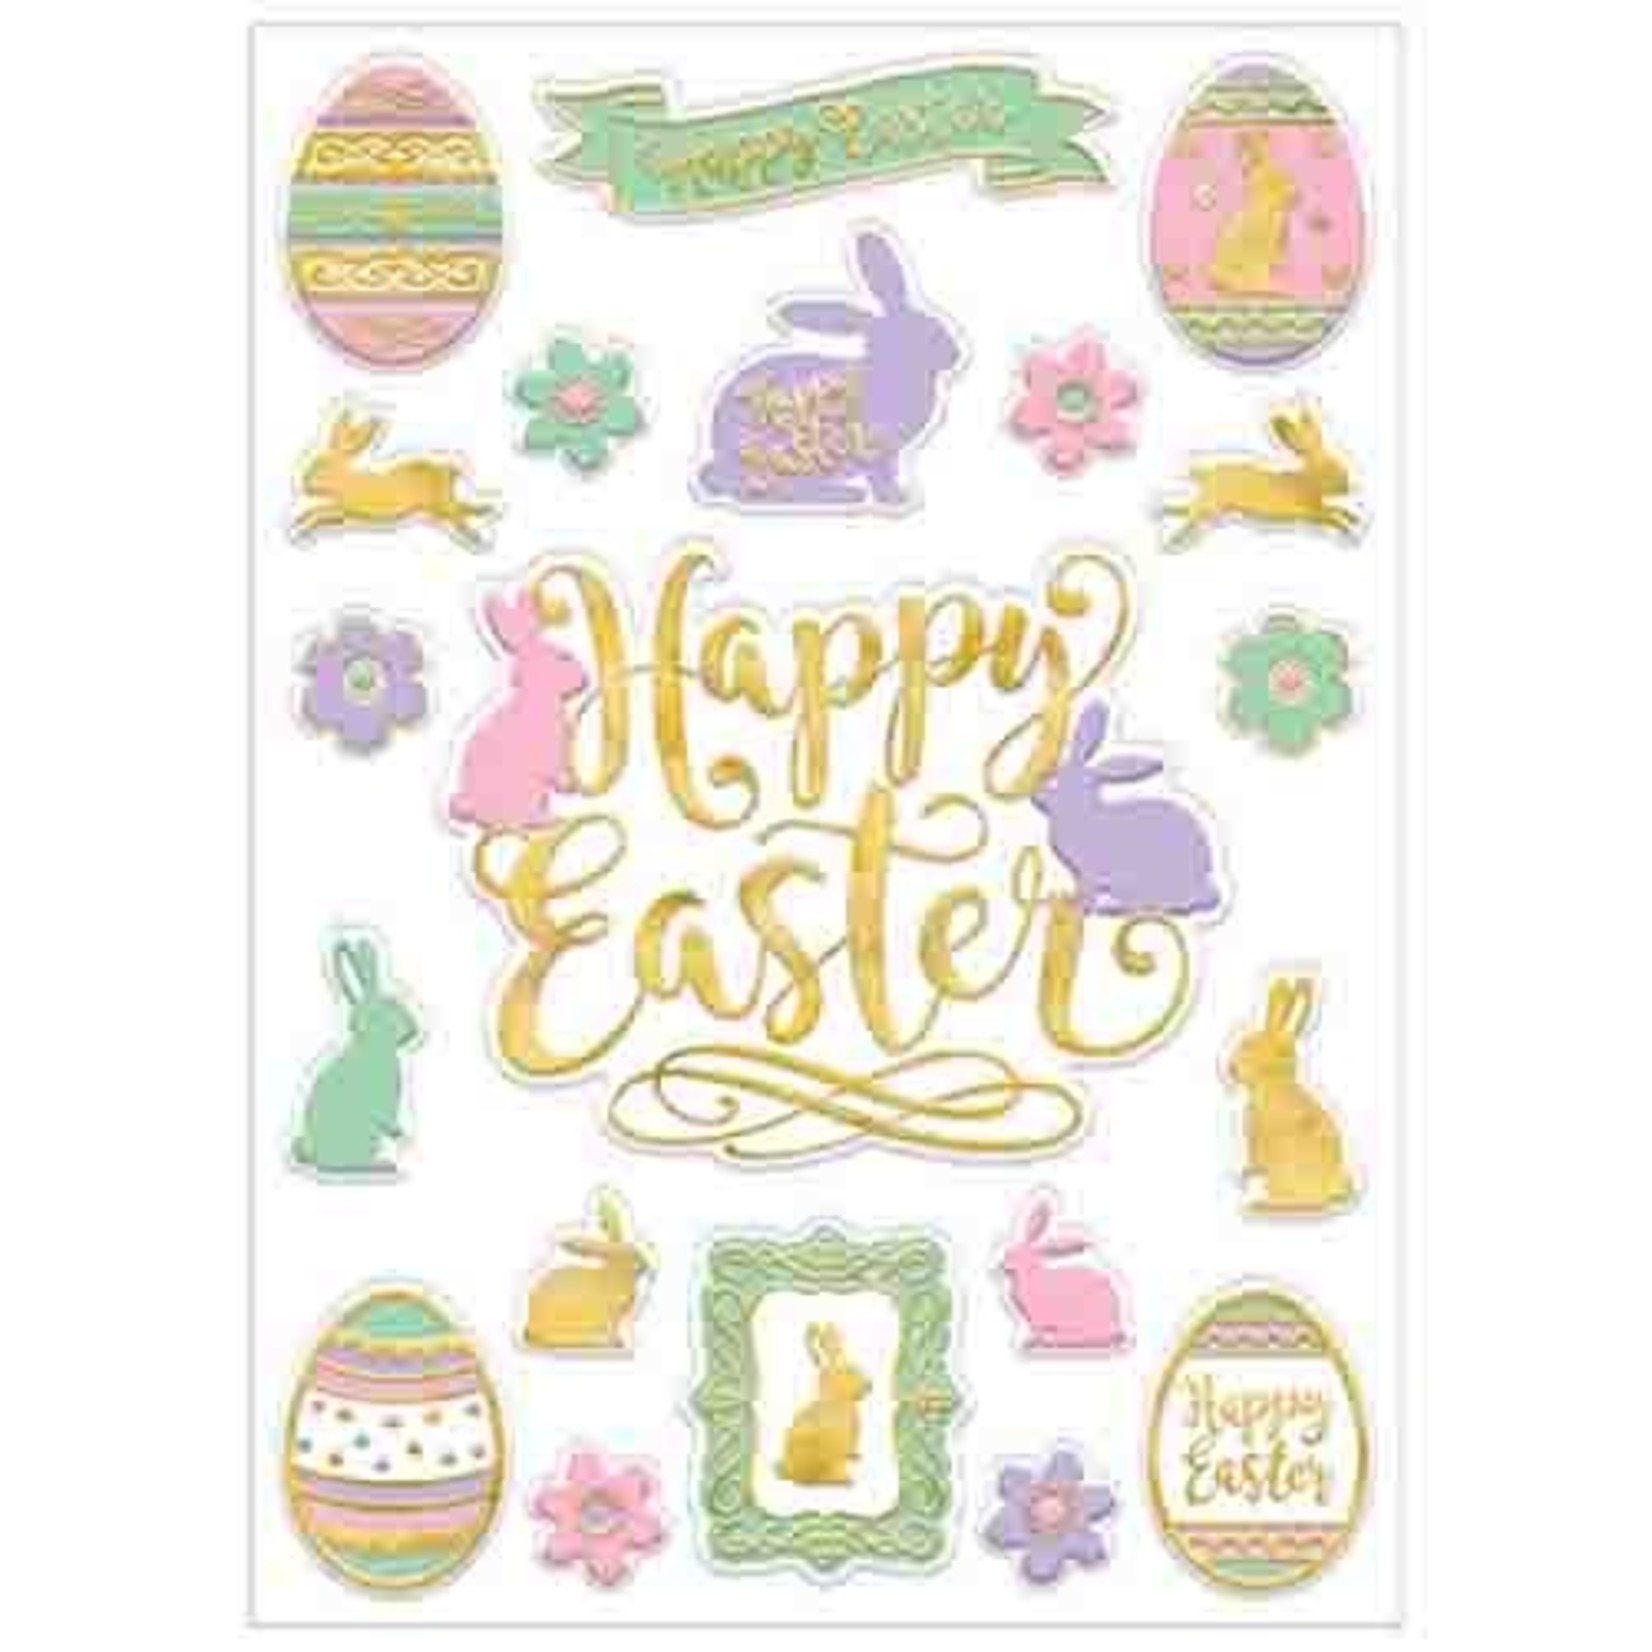 Amscan Happy Easter Window Decorations - 20ct.